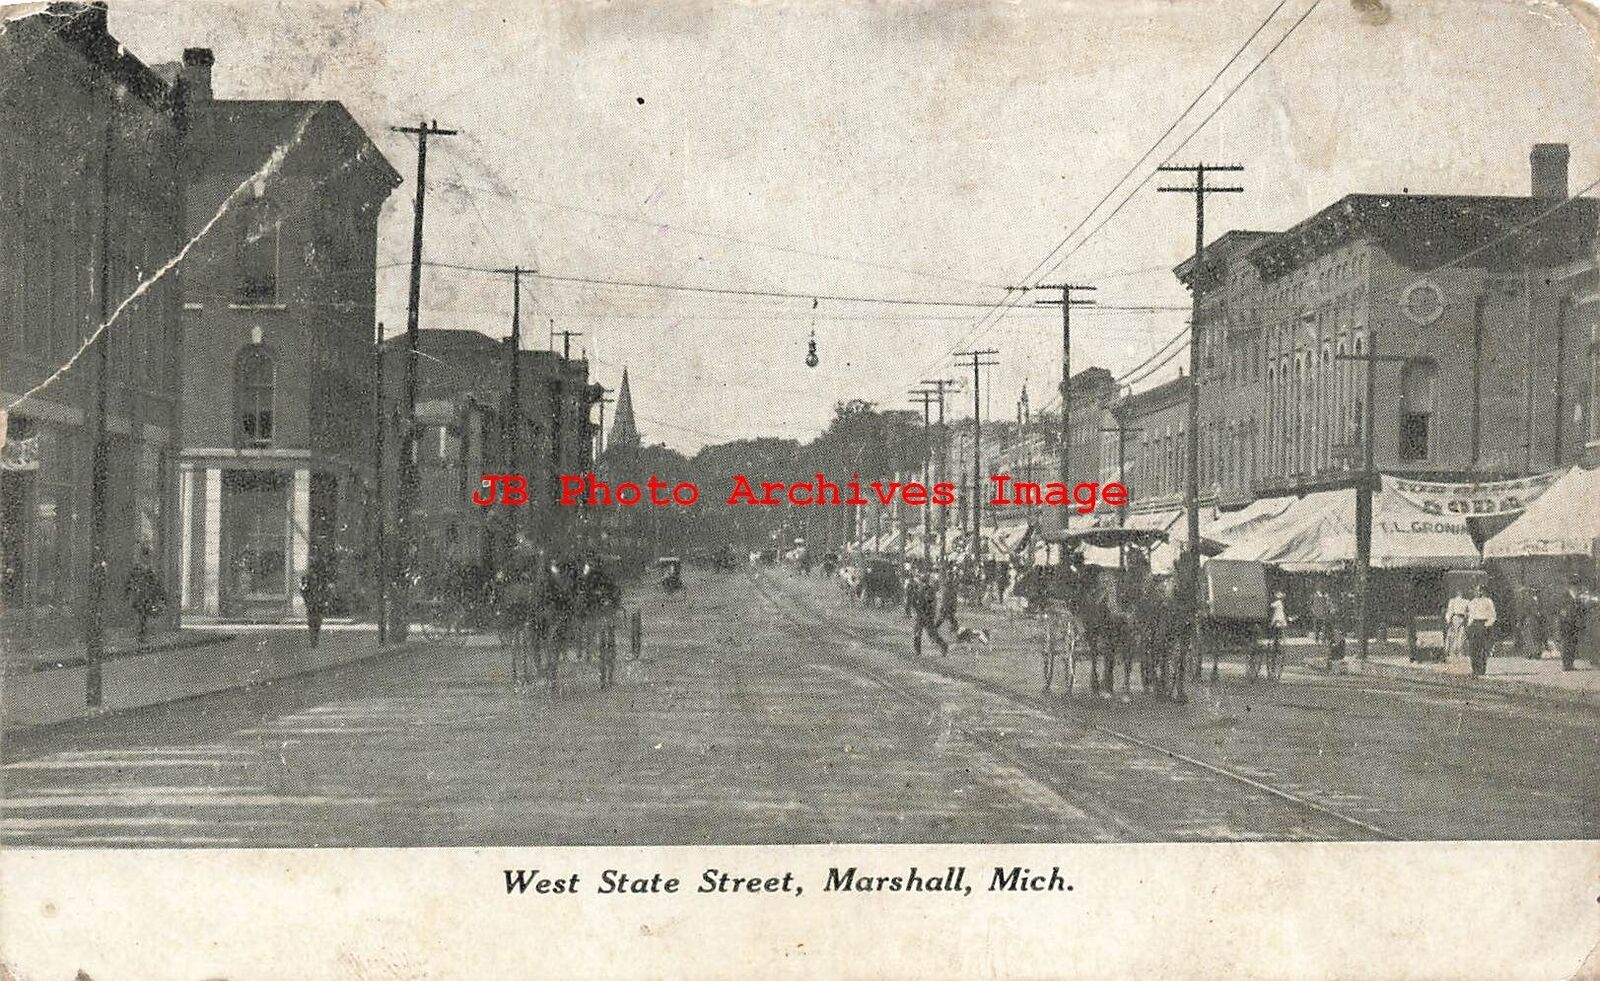 MI, Marshall, Michigan, West State Street, Business Section,1914 PM